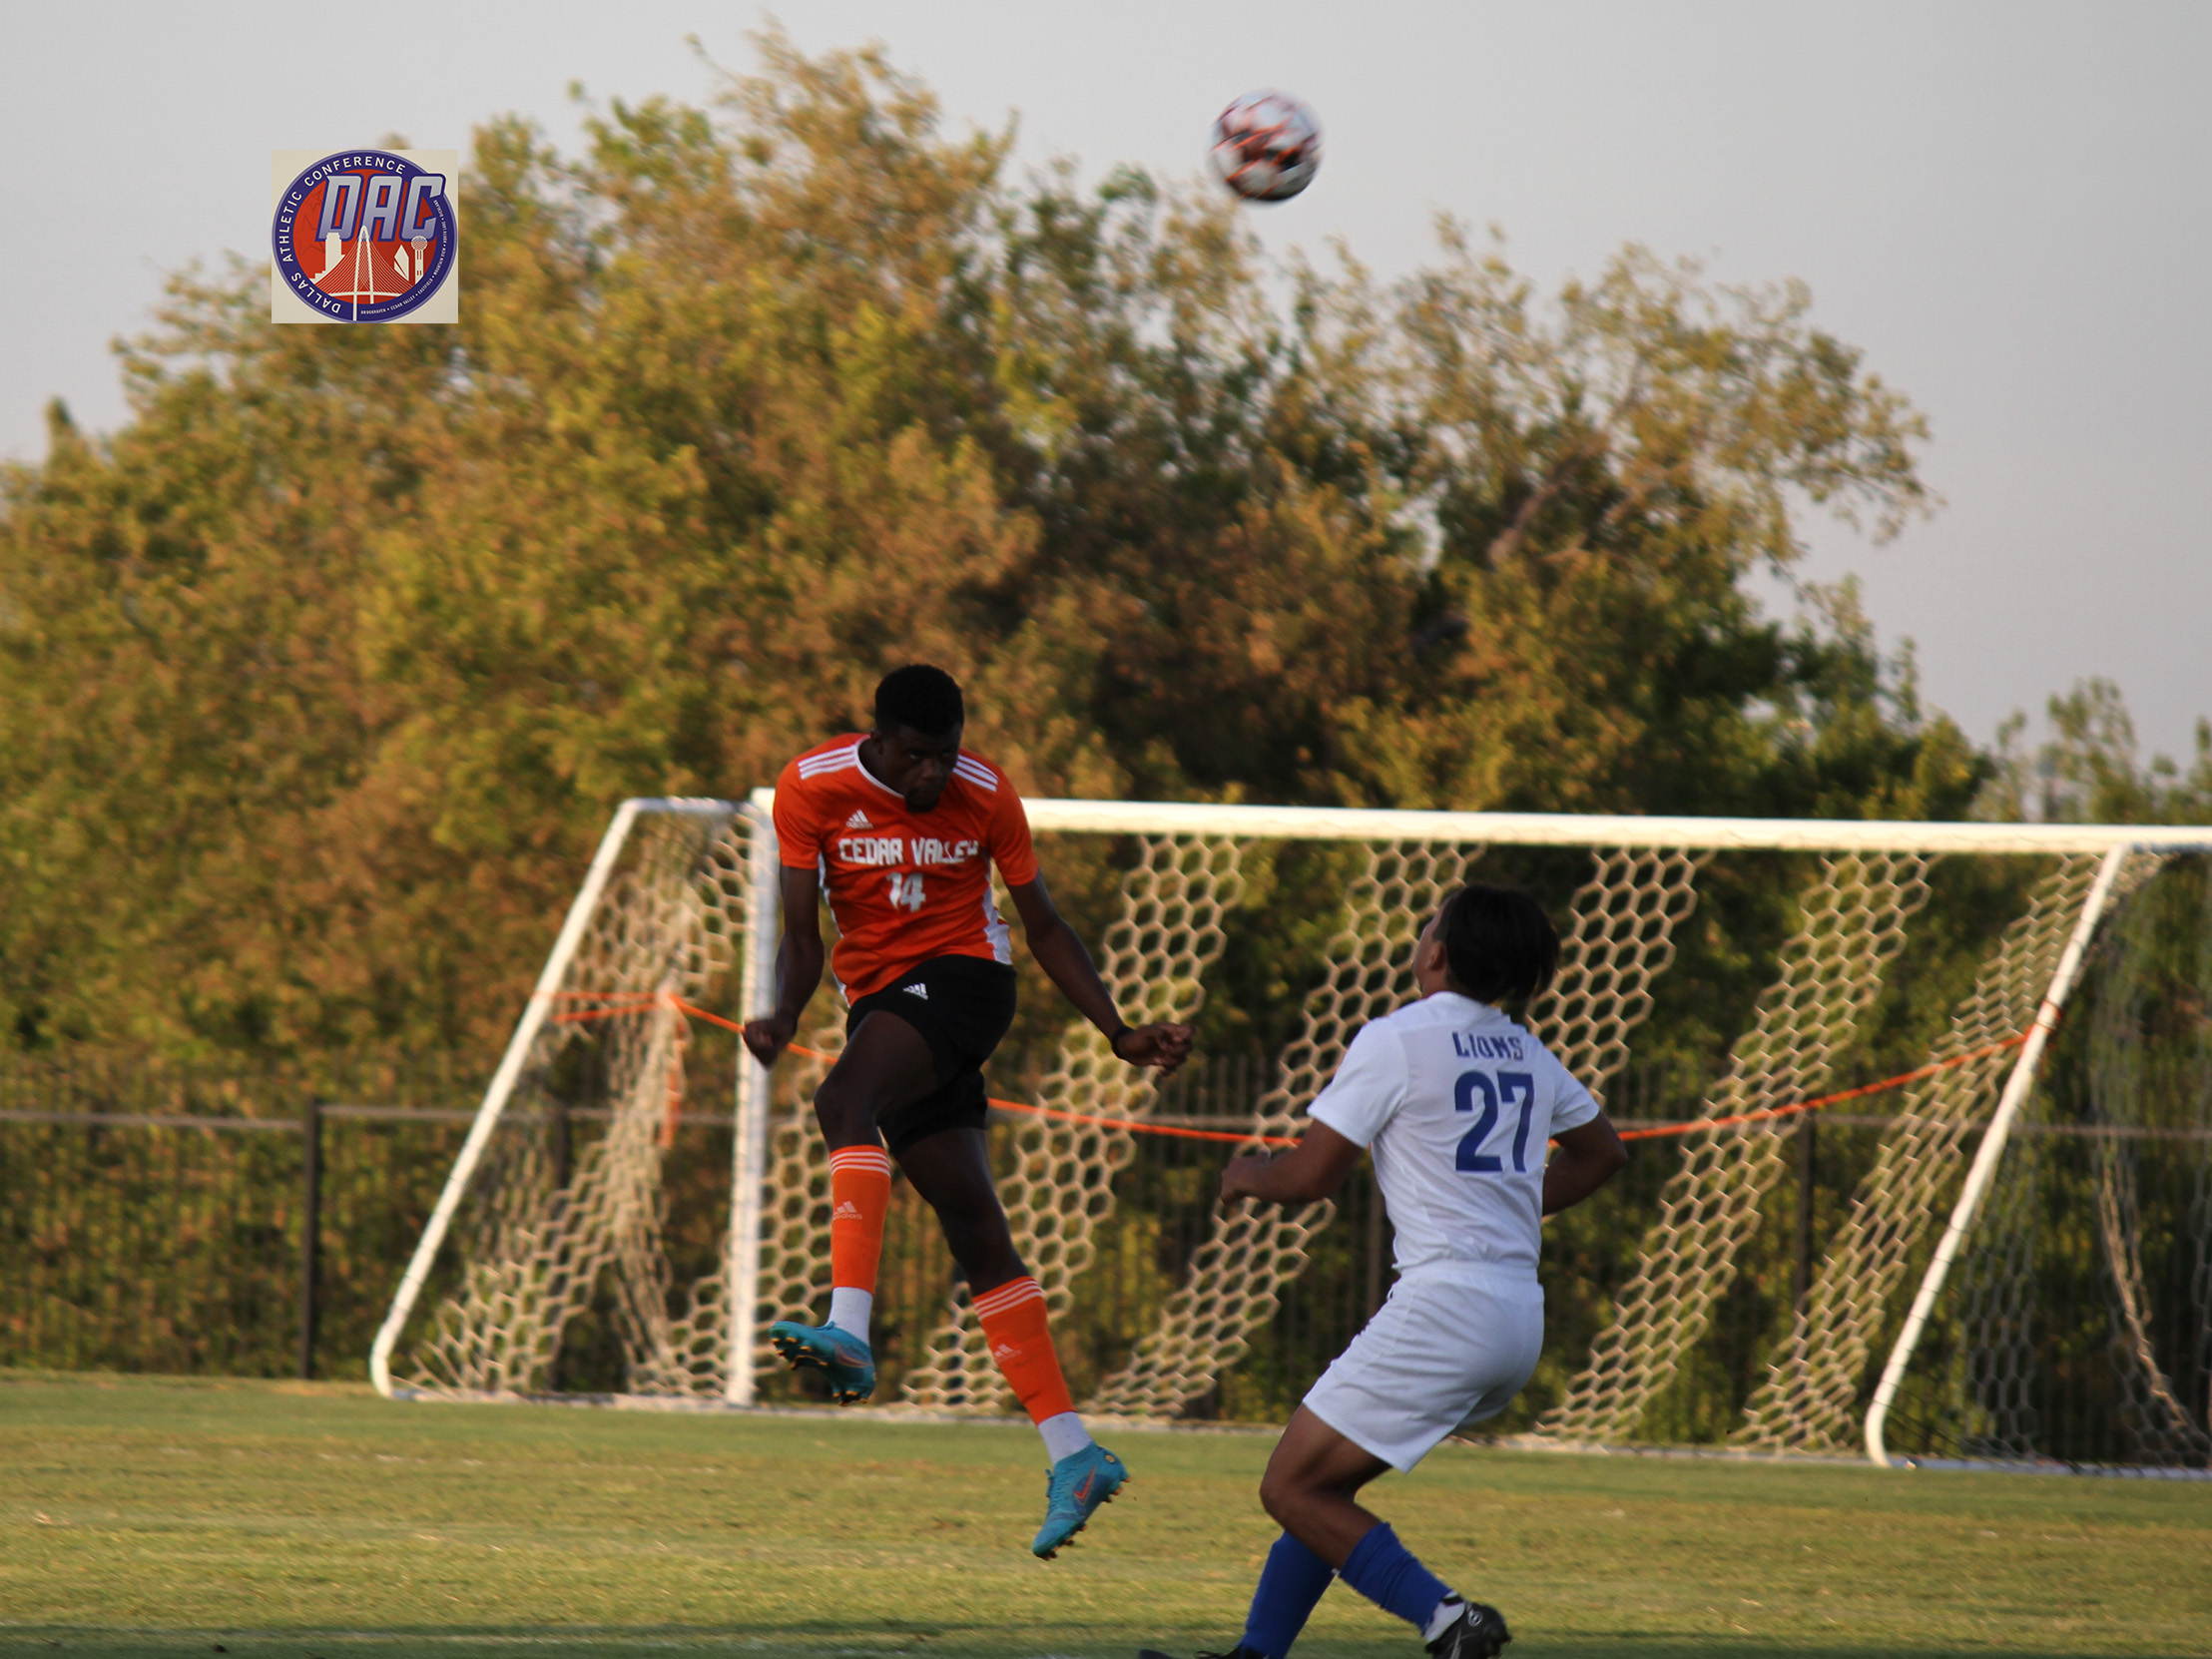 Farouk Abdulsalam was named the Dallas Athletic Conference Defensive Player of the Year.